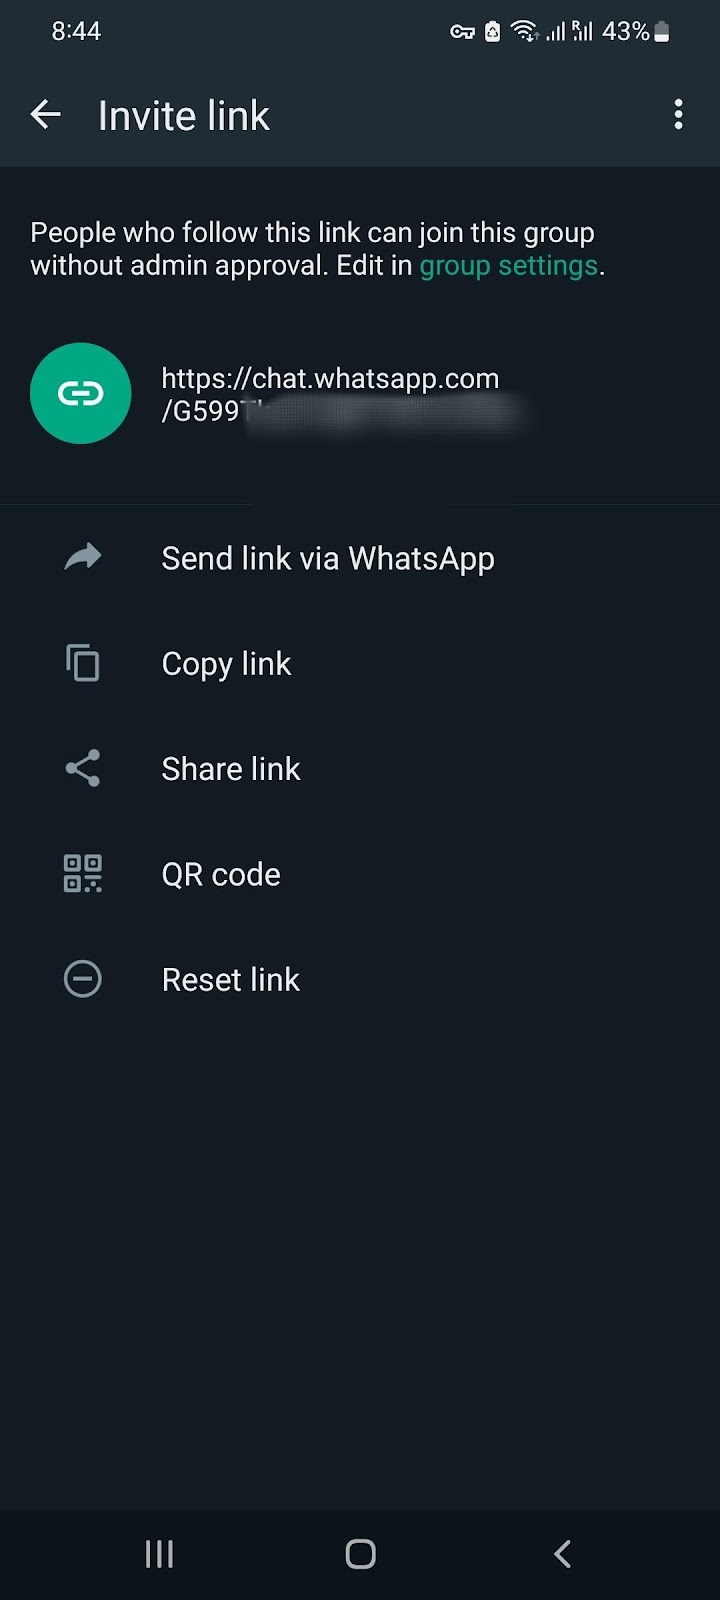 How To Create A WhatsApp Group Link On Android?